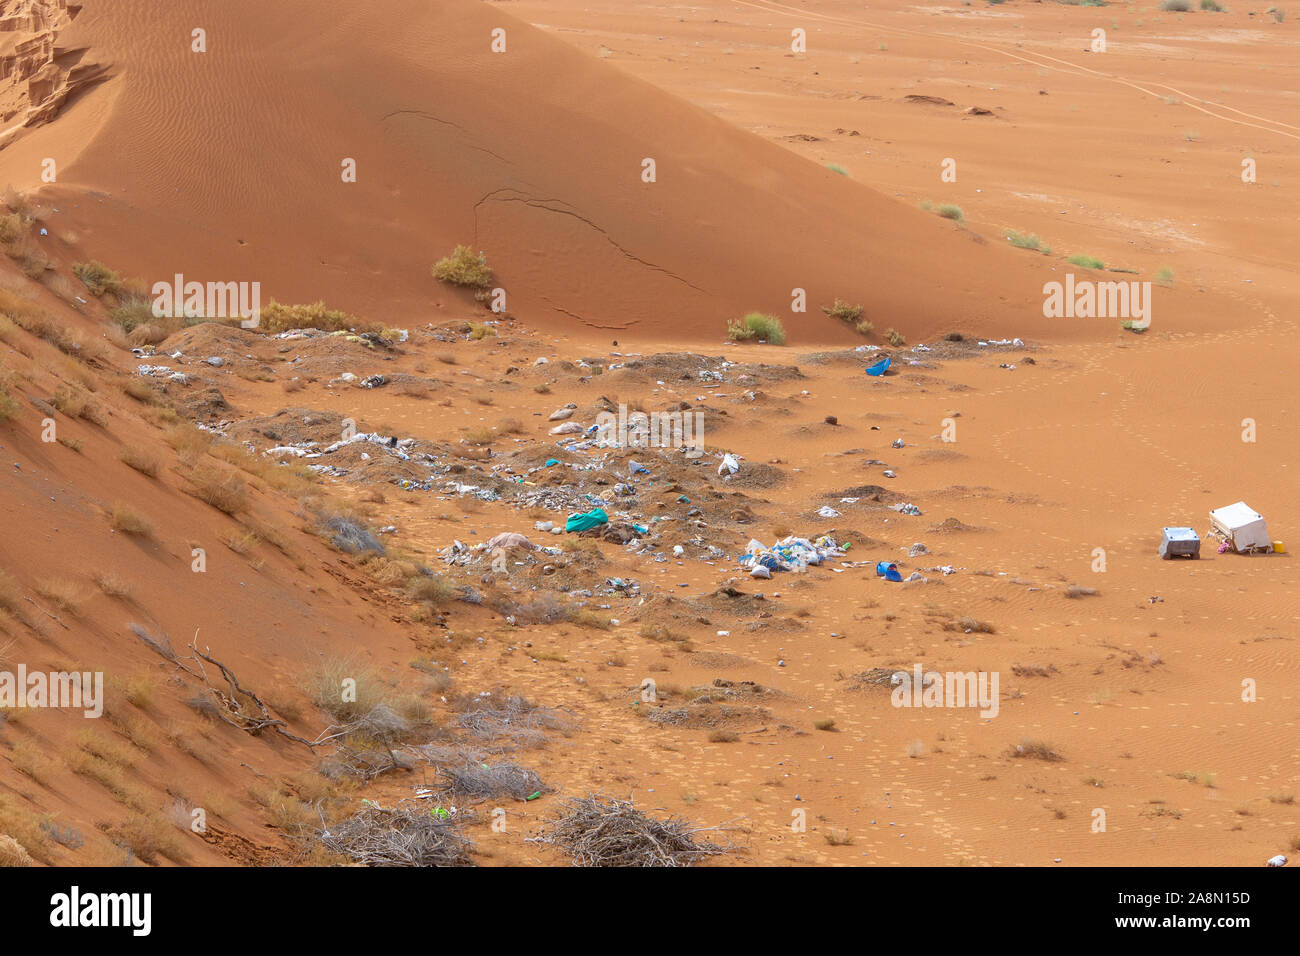 Plastic pollution and garbage dumping in the desert sand. Need for awareness of enviornmental protection, recycling, and protecting the world. Environ Stock Photo